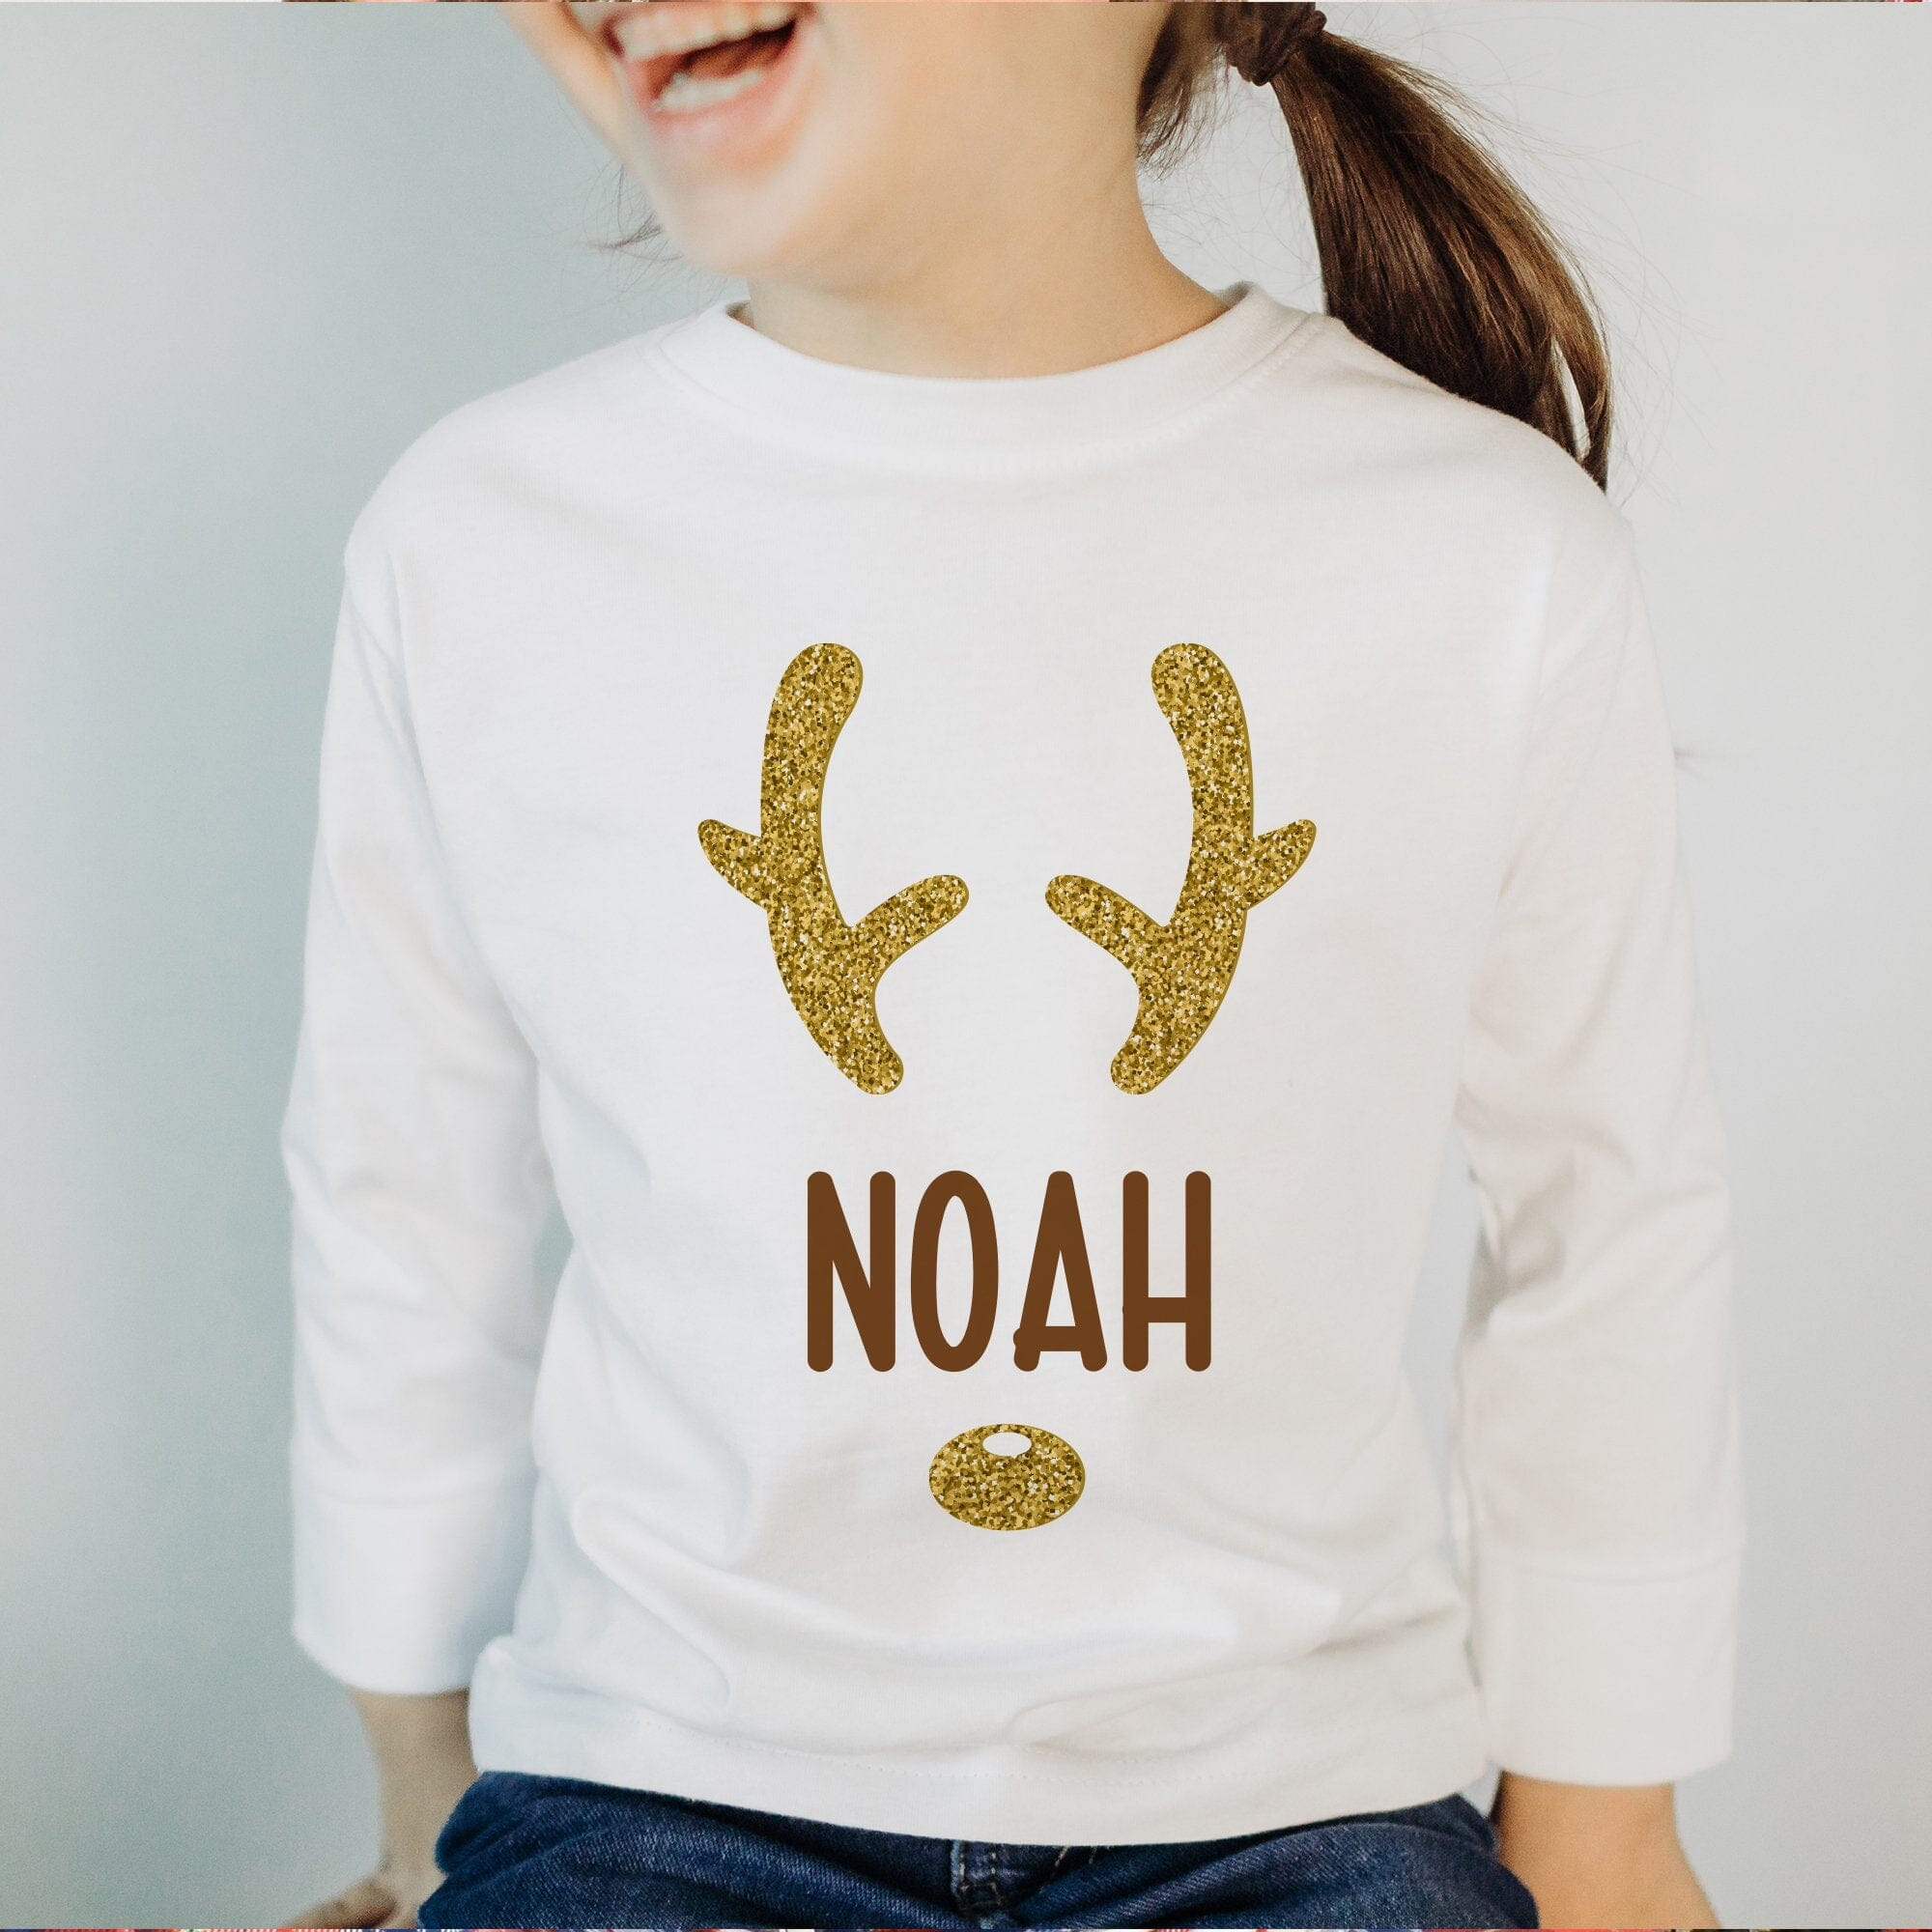 Personalised Matching Family Christmas Jumper With Name In Gold Glitter Unisex Adult And Kids Size